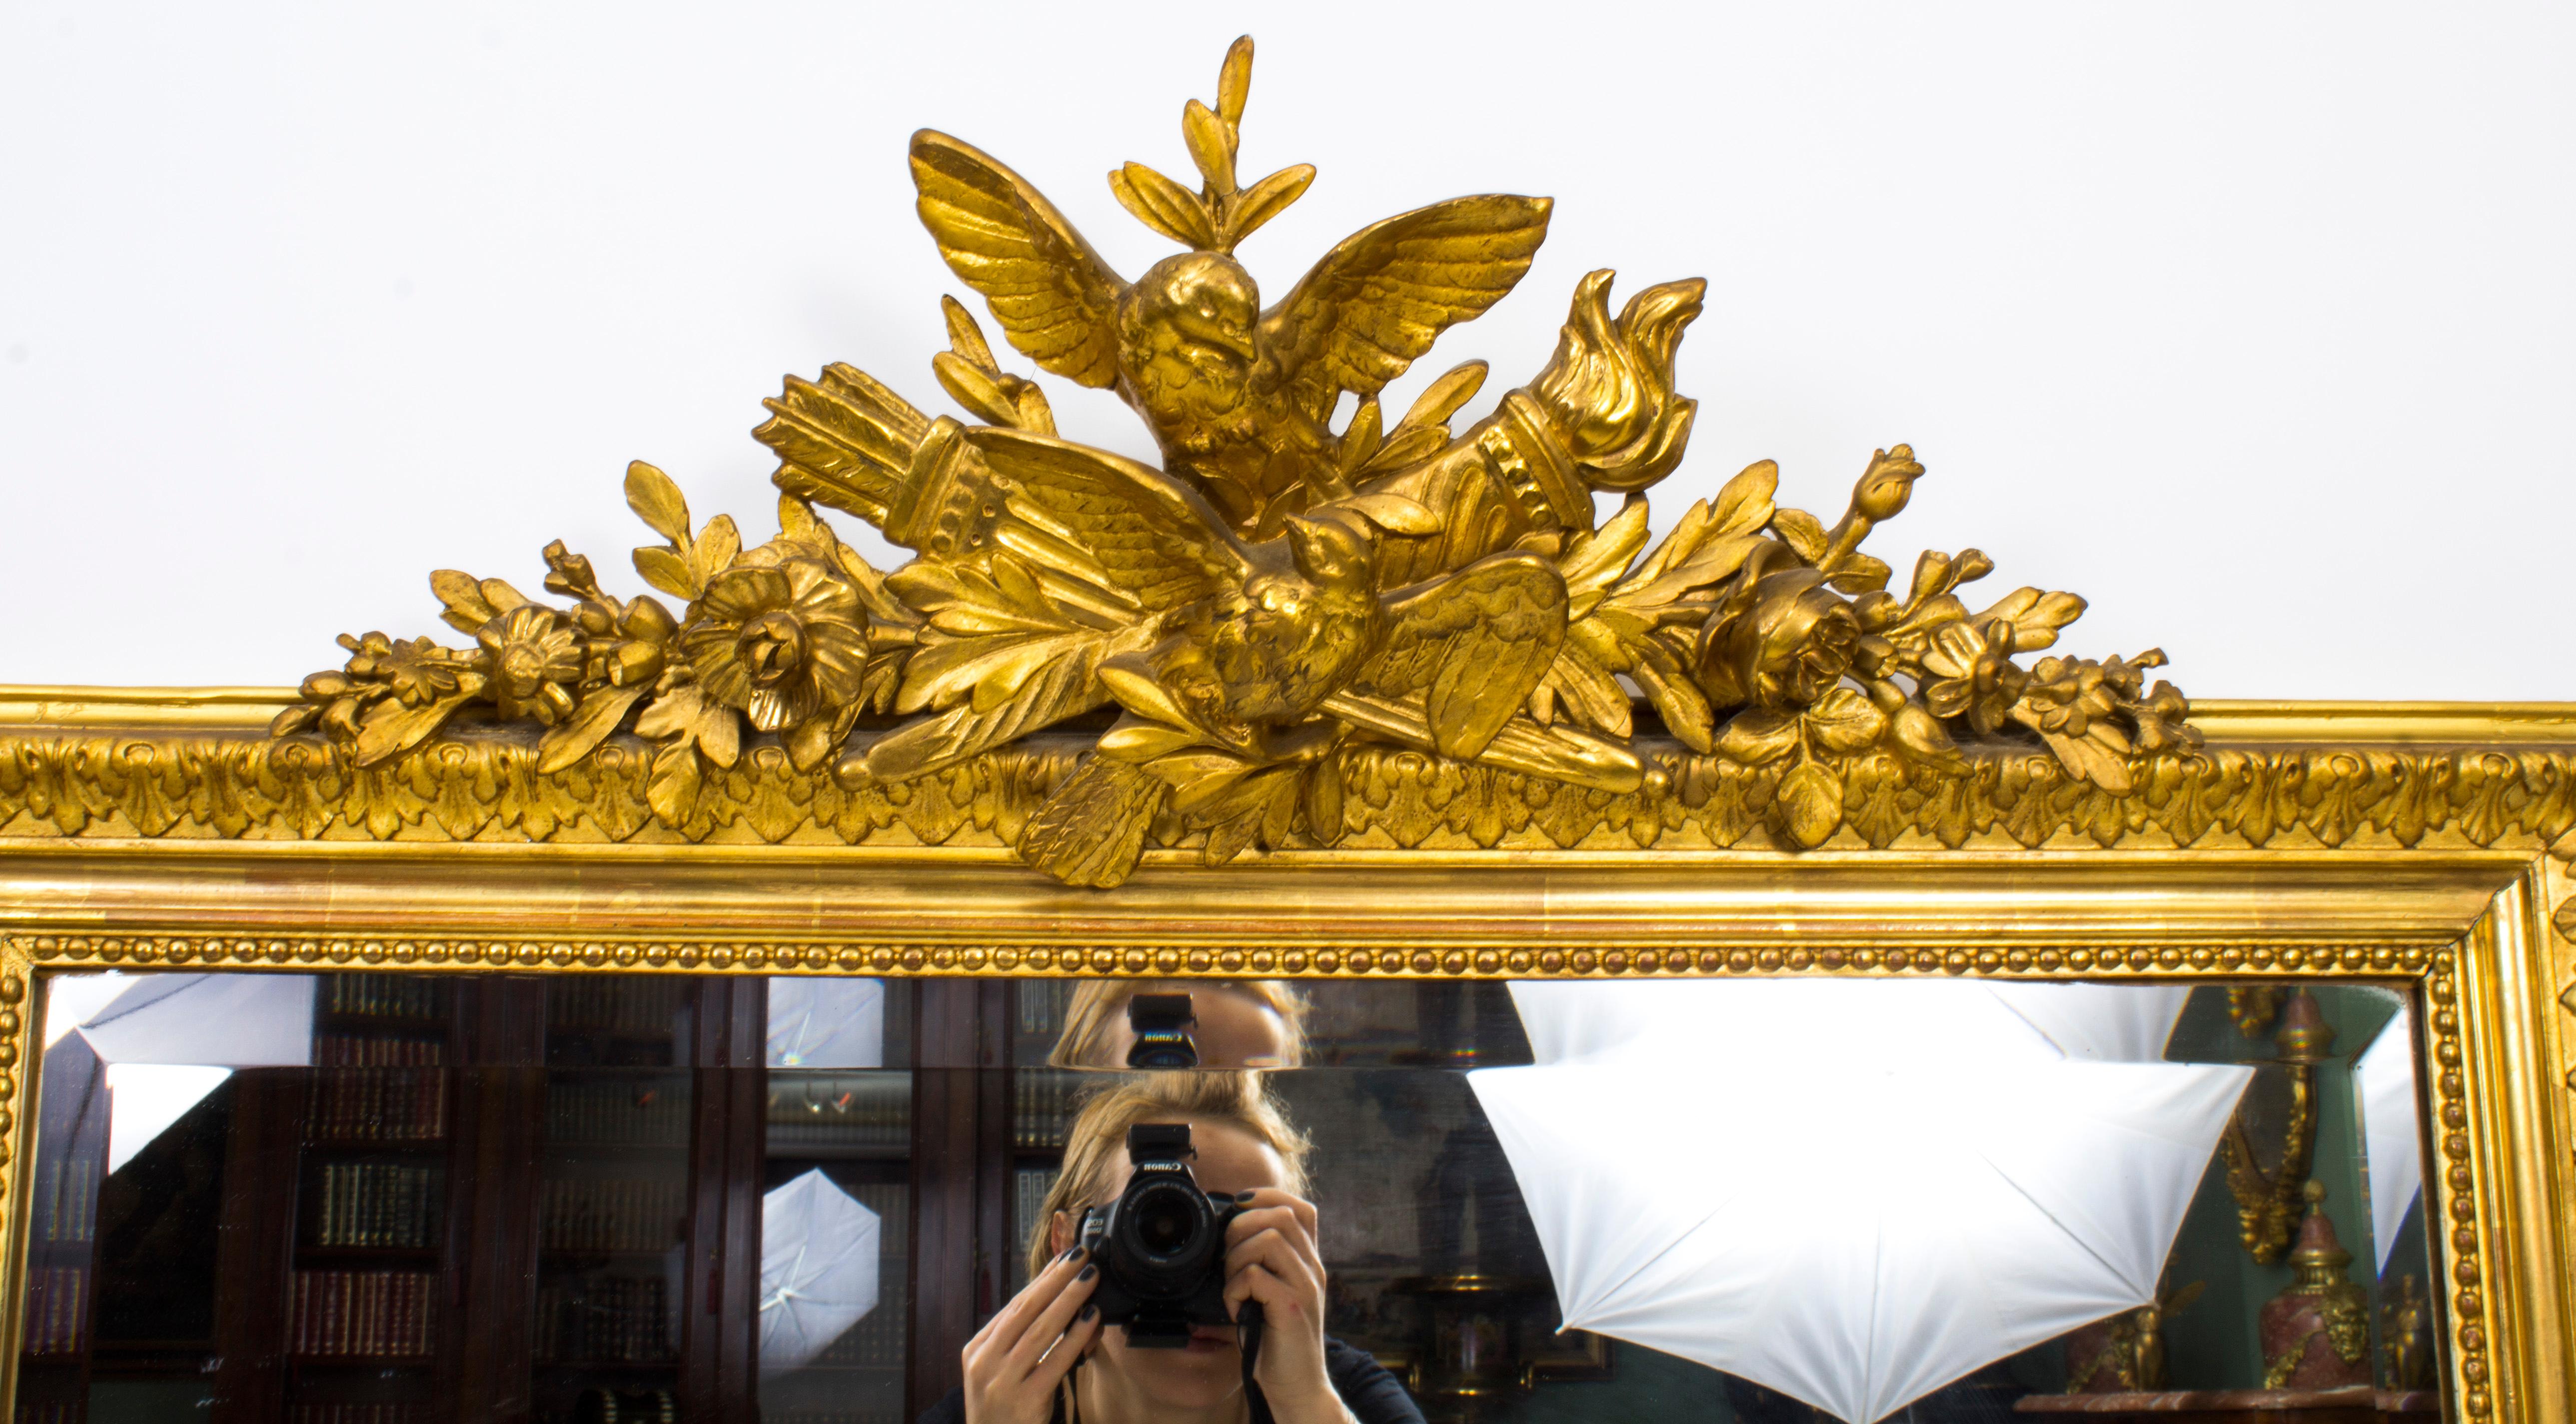 This is a beautiful large antique French carved giltwood overmantel mirror, C 1860 in date.
The frame is surmounted with a striking carved giltwood central finial with doves, a flaming torch, a quiver of arrows and foliate and floral decoration.